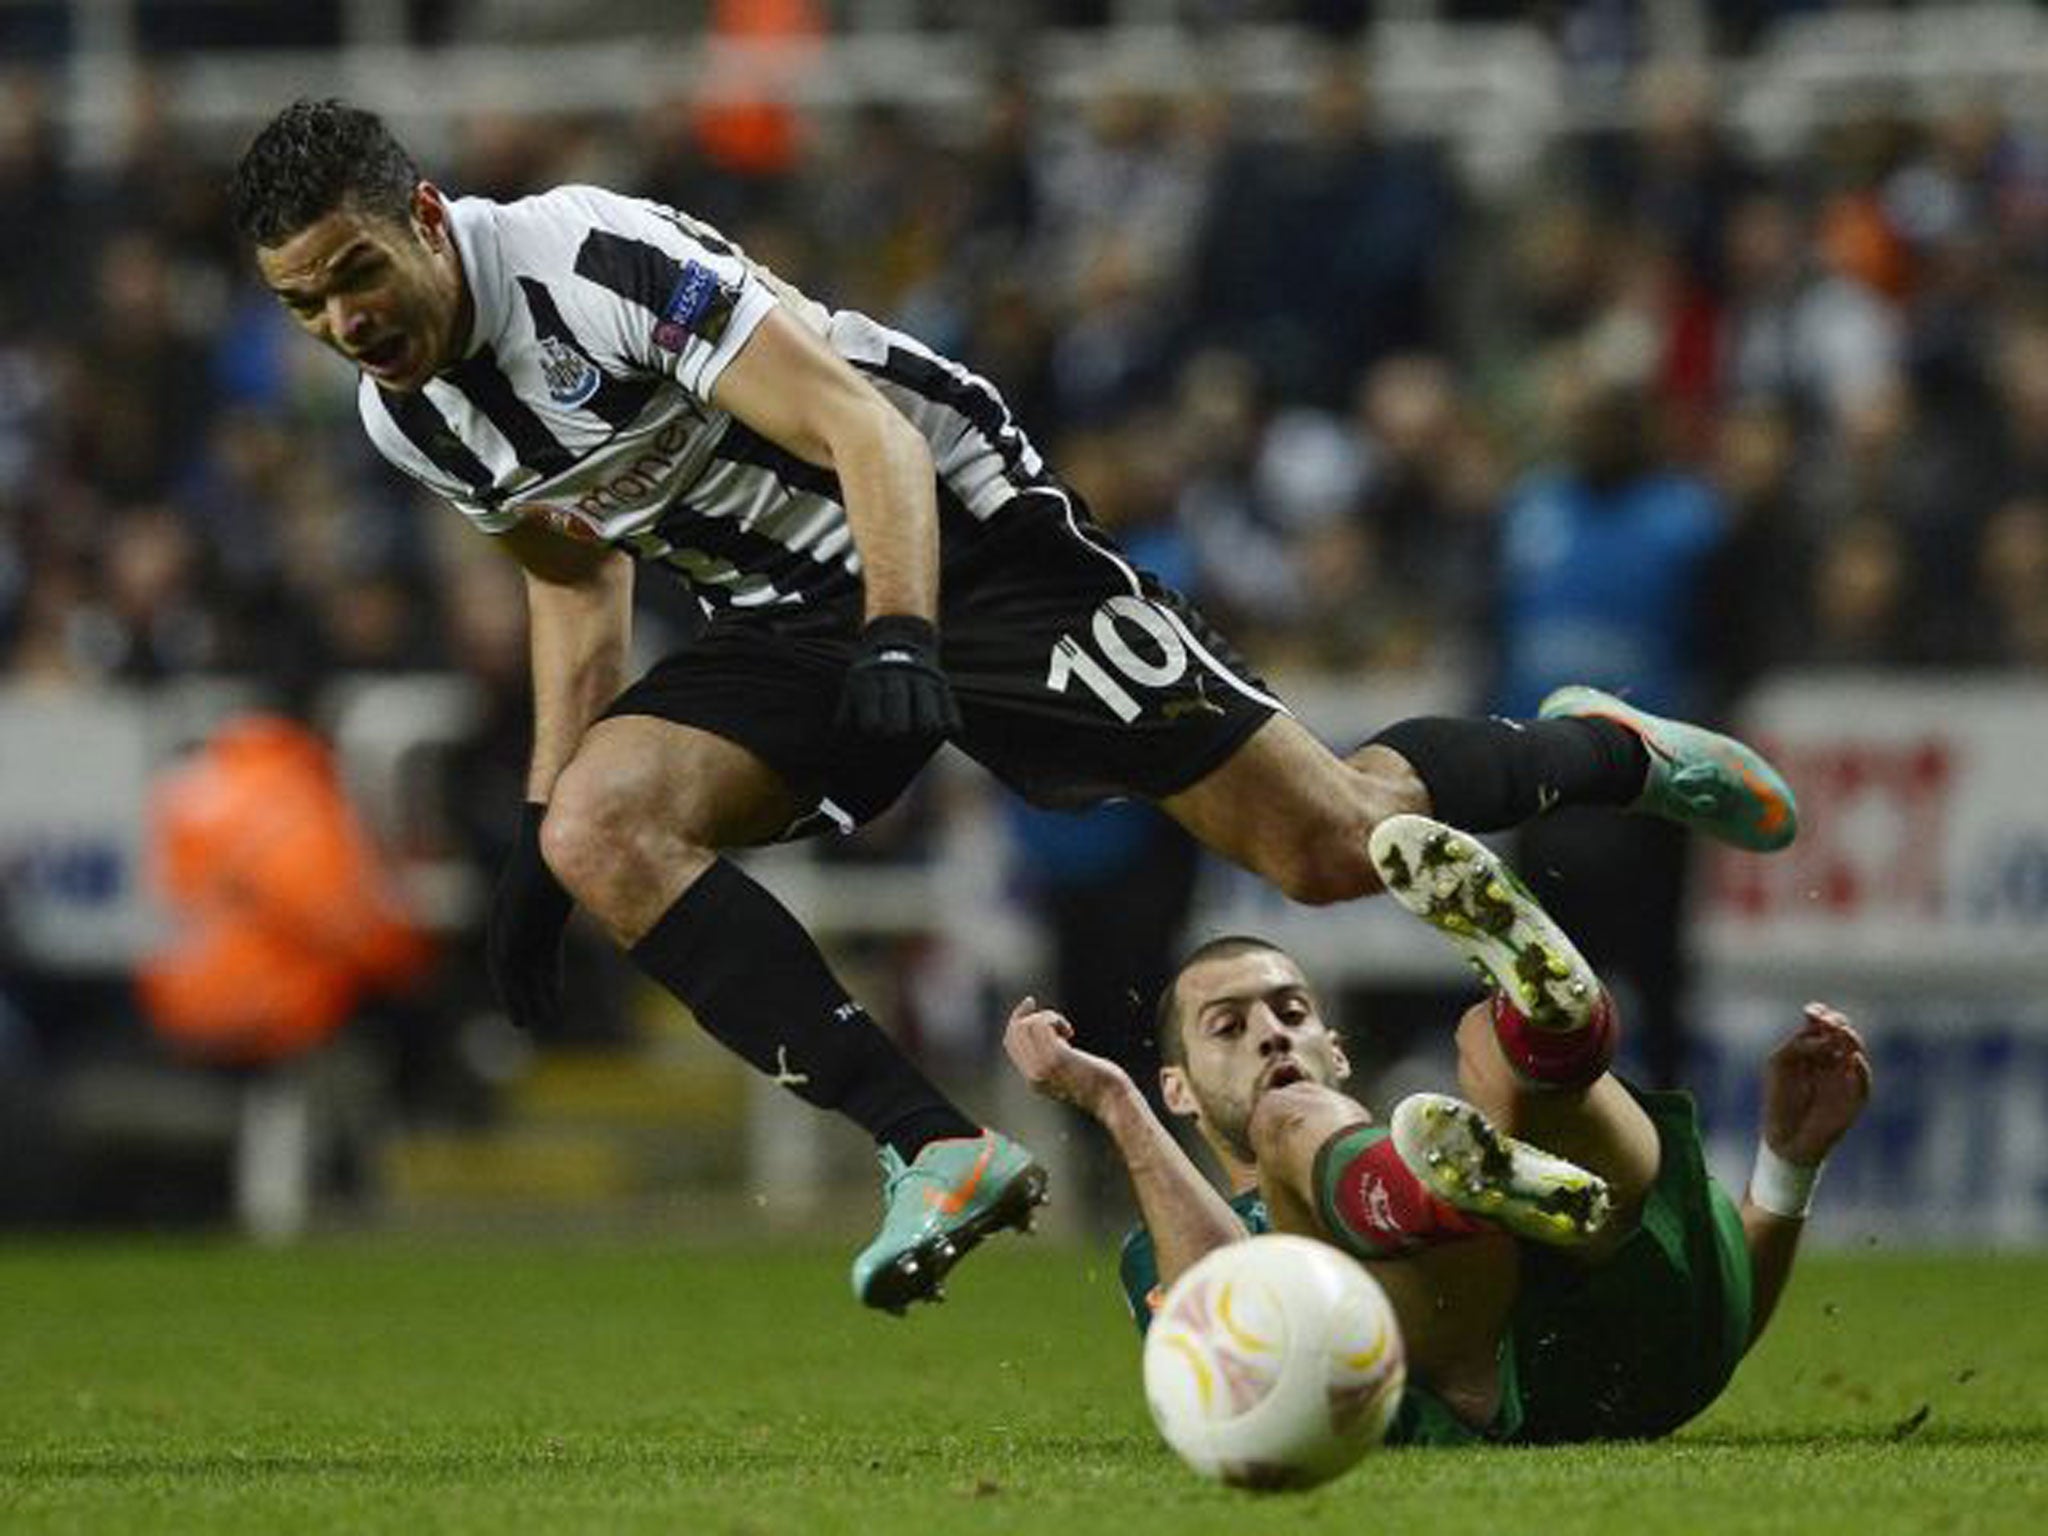 Hatem ben Arfa was in inspirational form before his injury